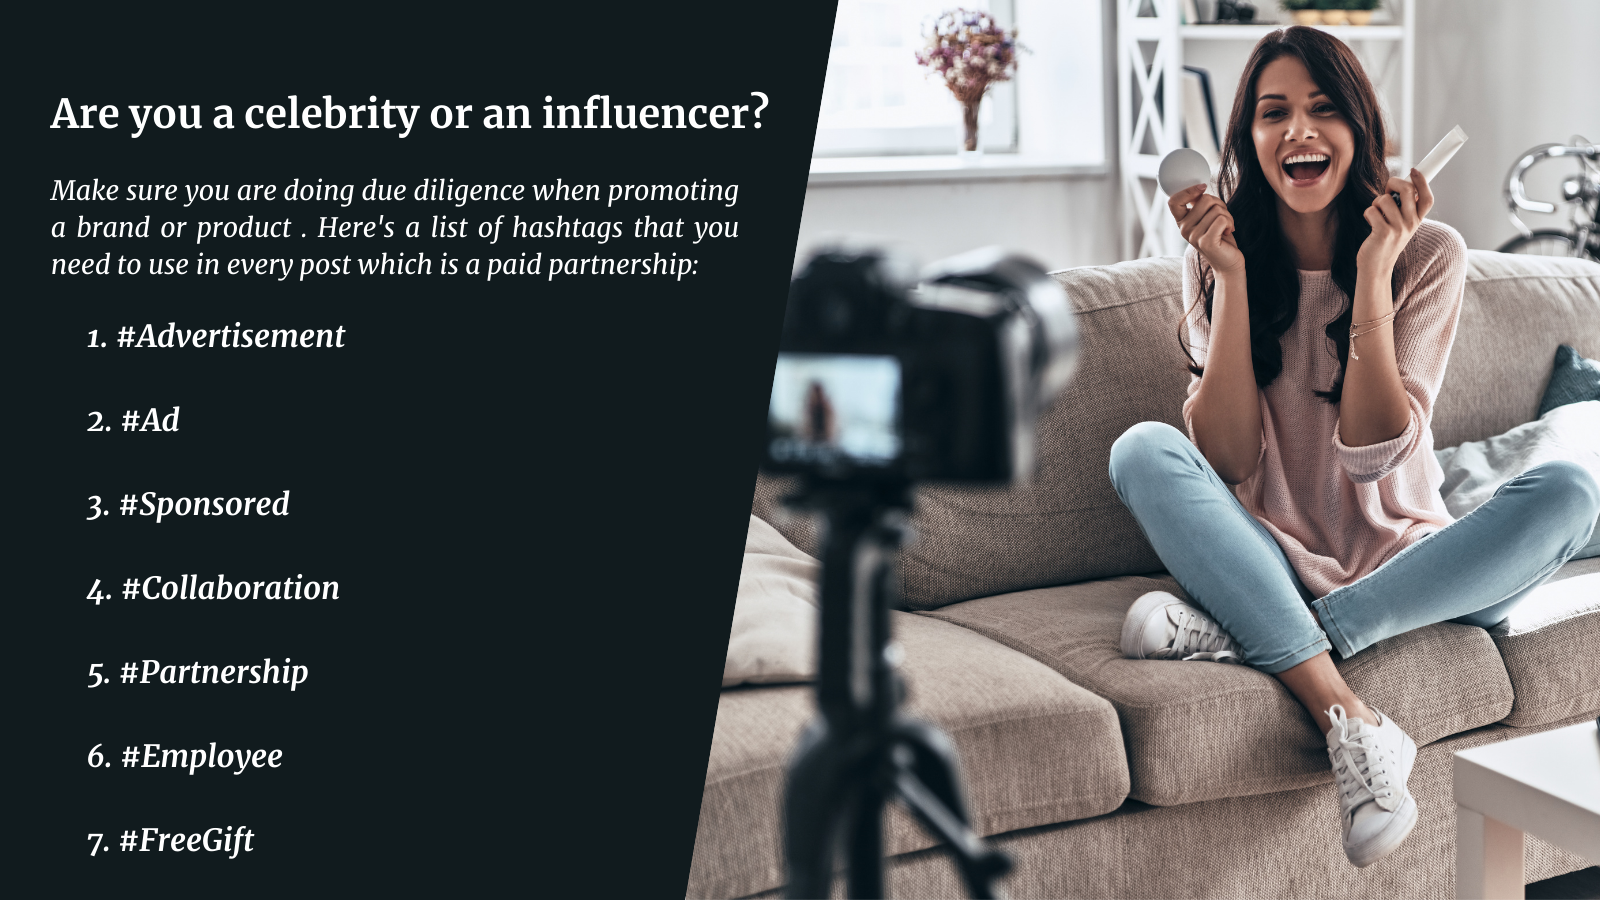 Seven hashtags you need to choose from if you are an influencer who is advertising in India